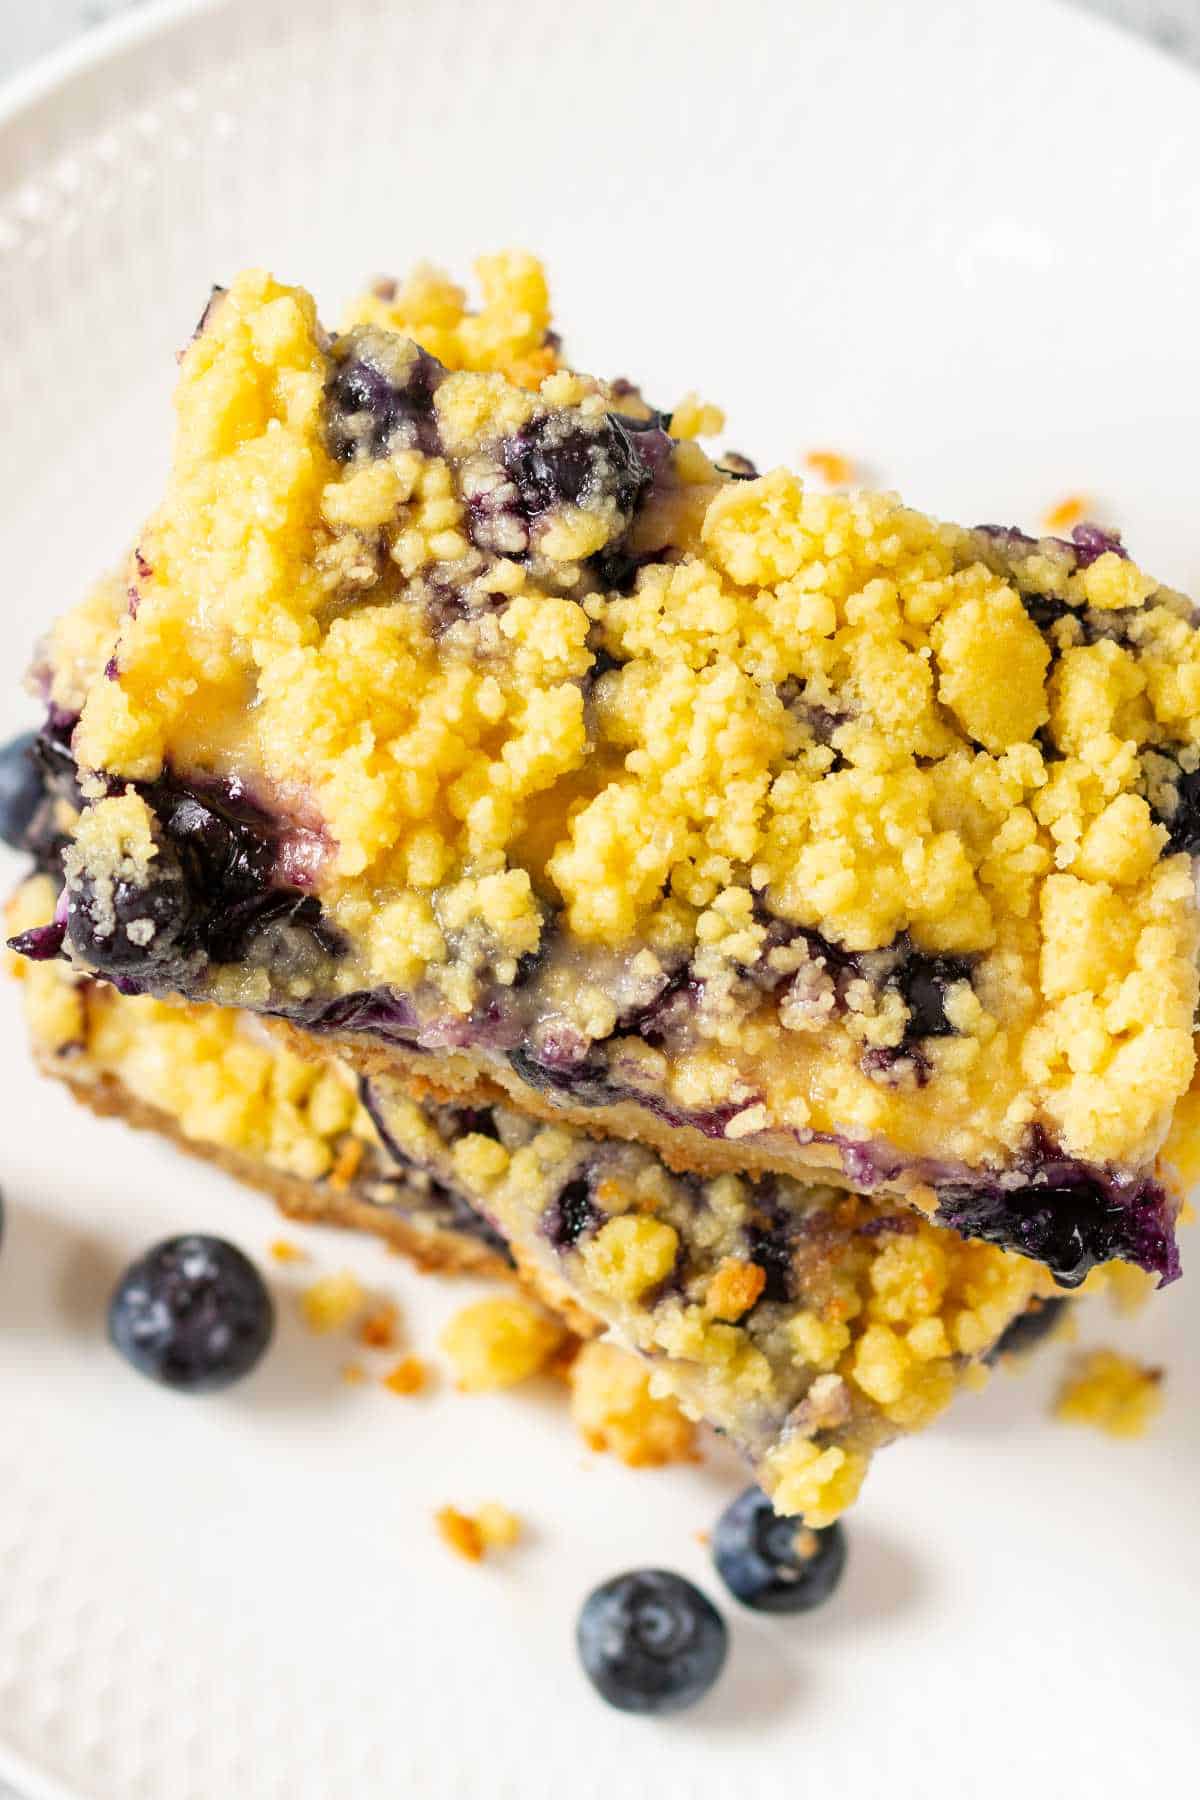 two blueberry lemon dump cake bars stacked on a plate.